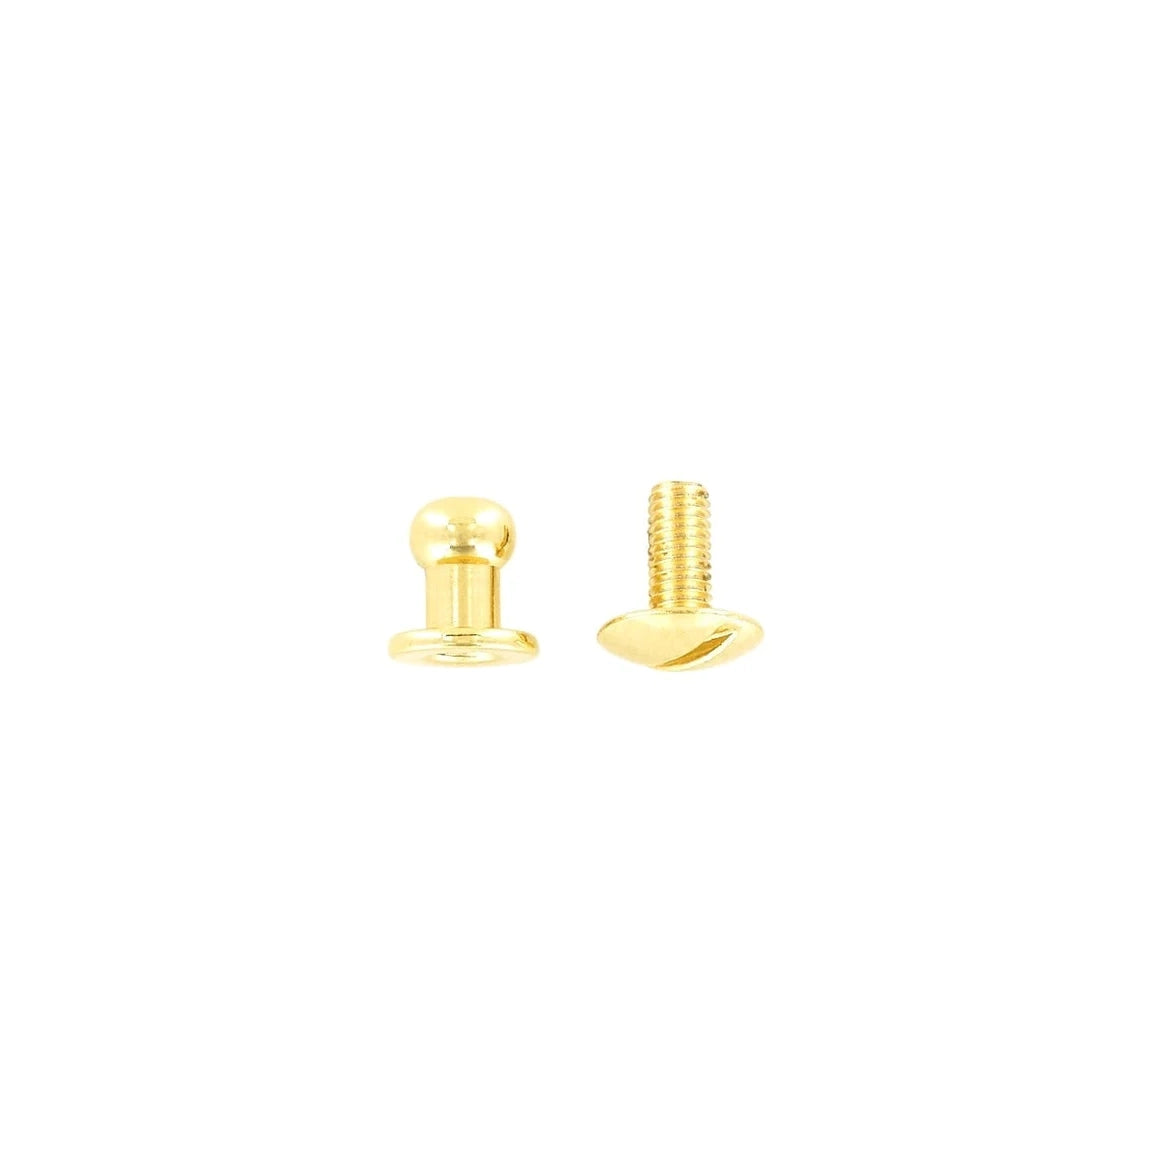 7mm, Gold, Small Collar Button Stud with Screw, Solid Brass - PK5, #P-2712-GOLD